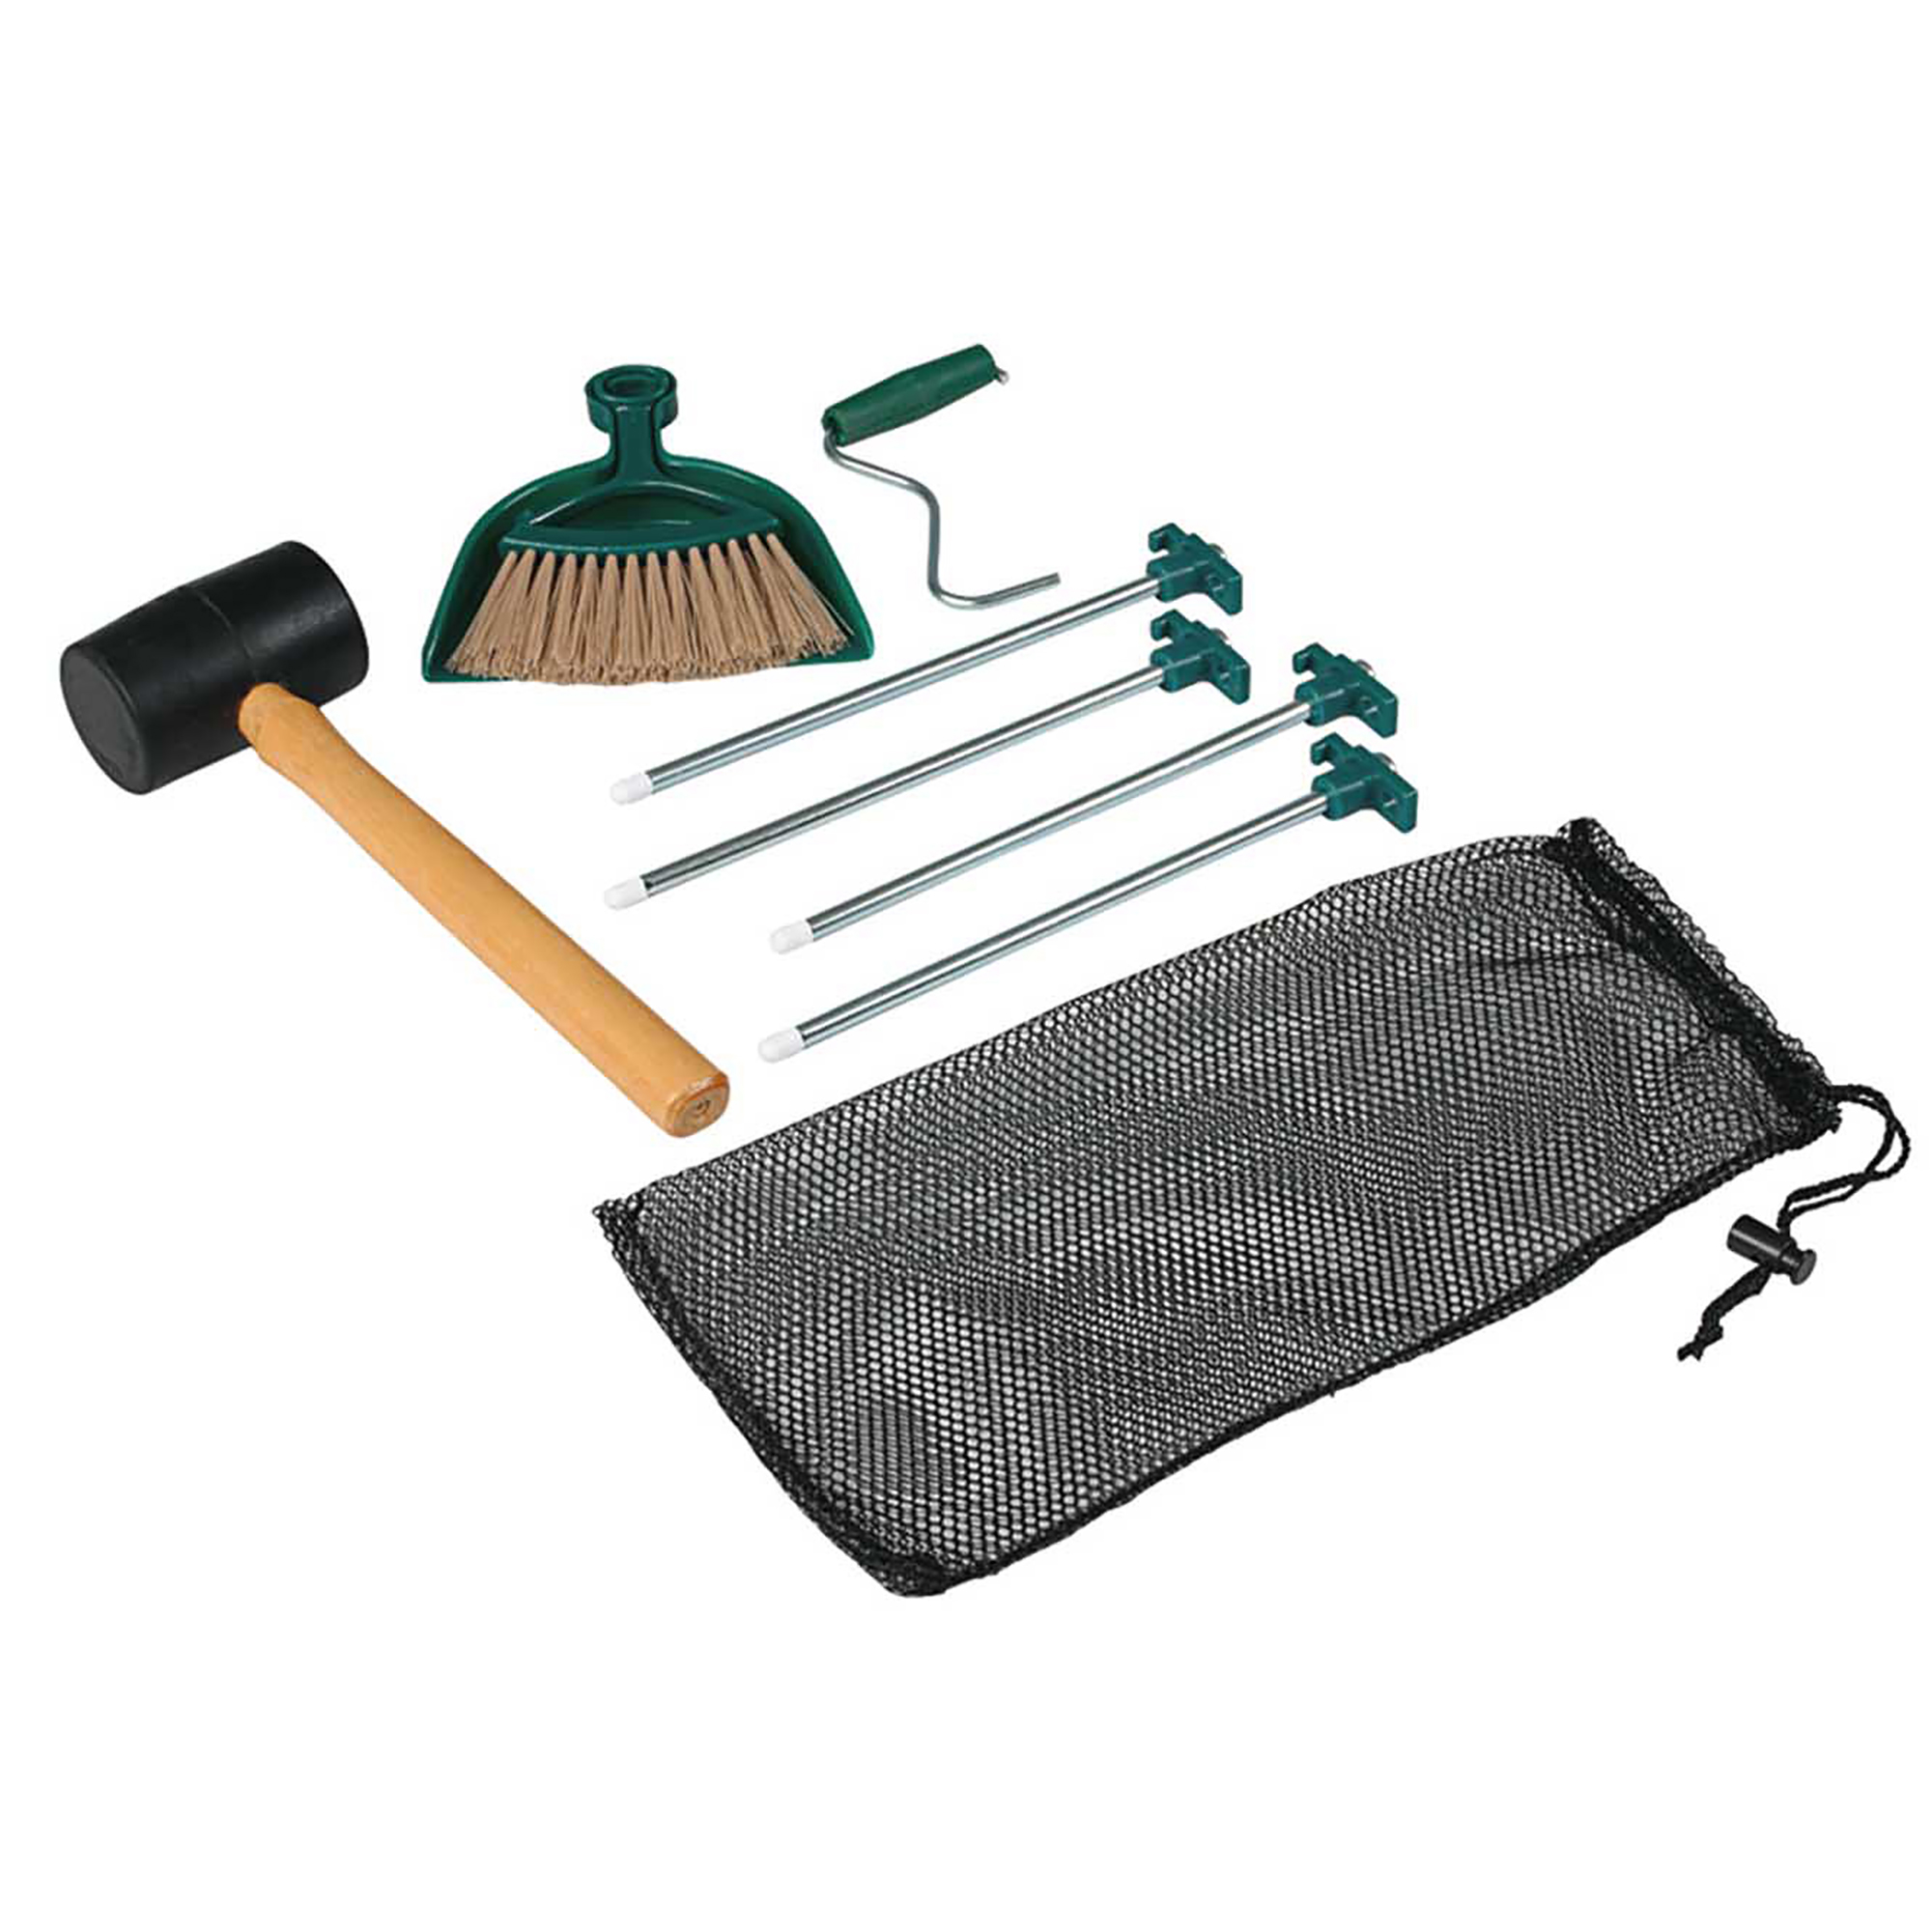 Coleman Setup and Cleaning Essentials Tent Kit, Black and Green - image 1 of 4